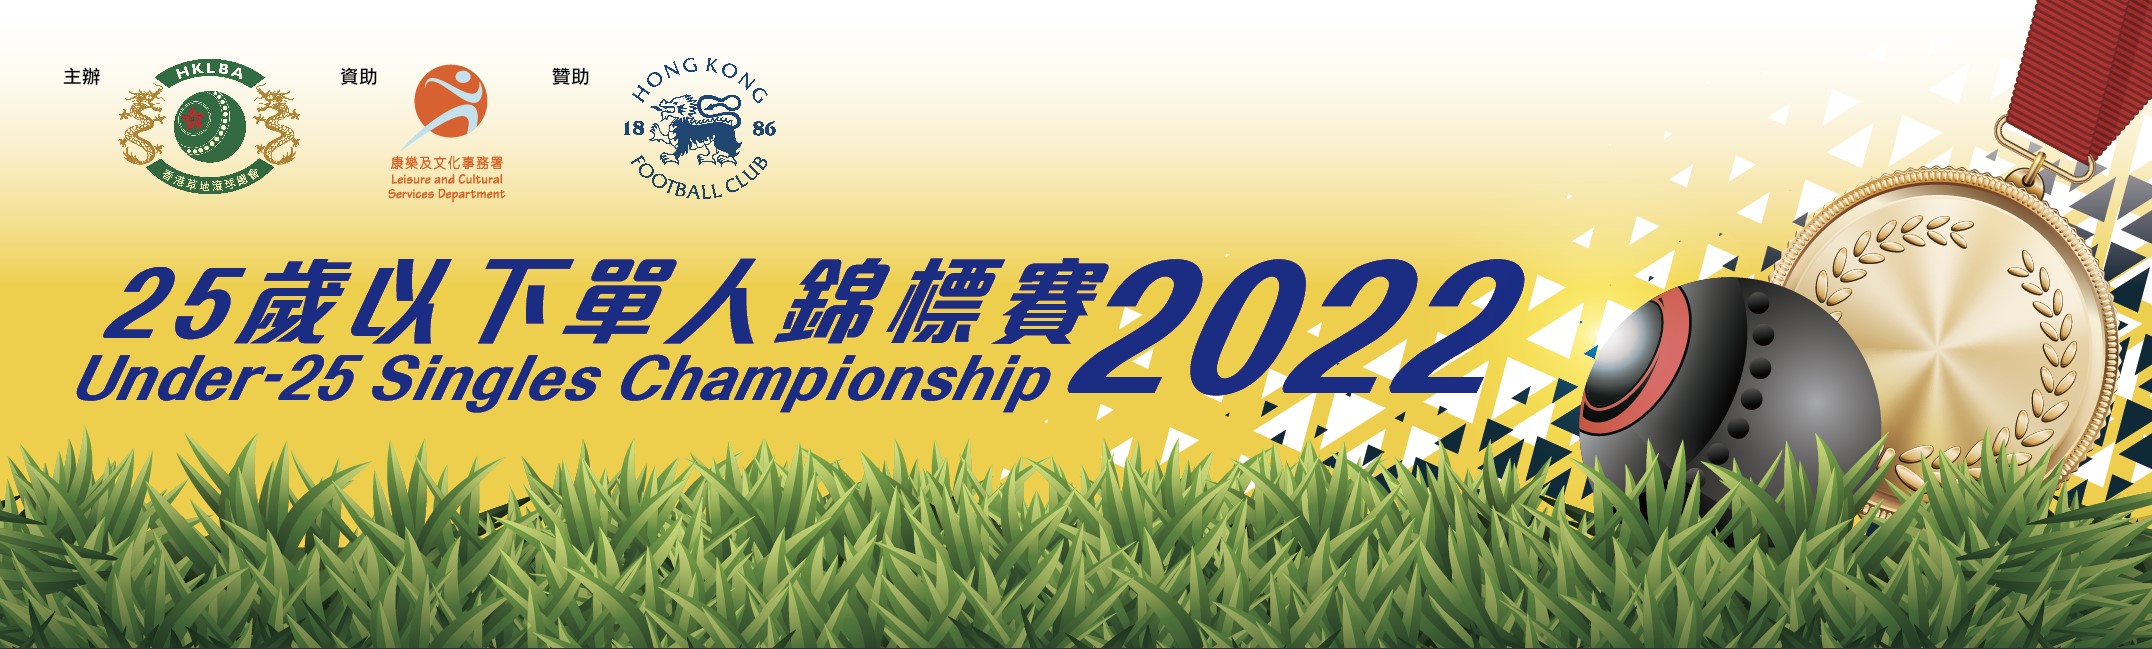 Under-25 Singles Championship 2022 (Updated on 29/11/22)